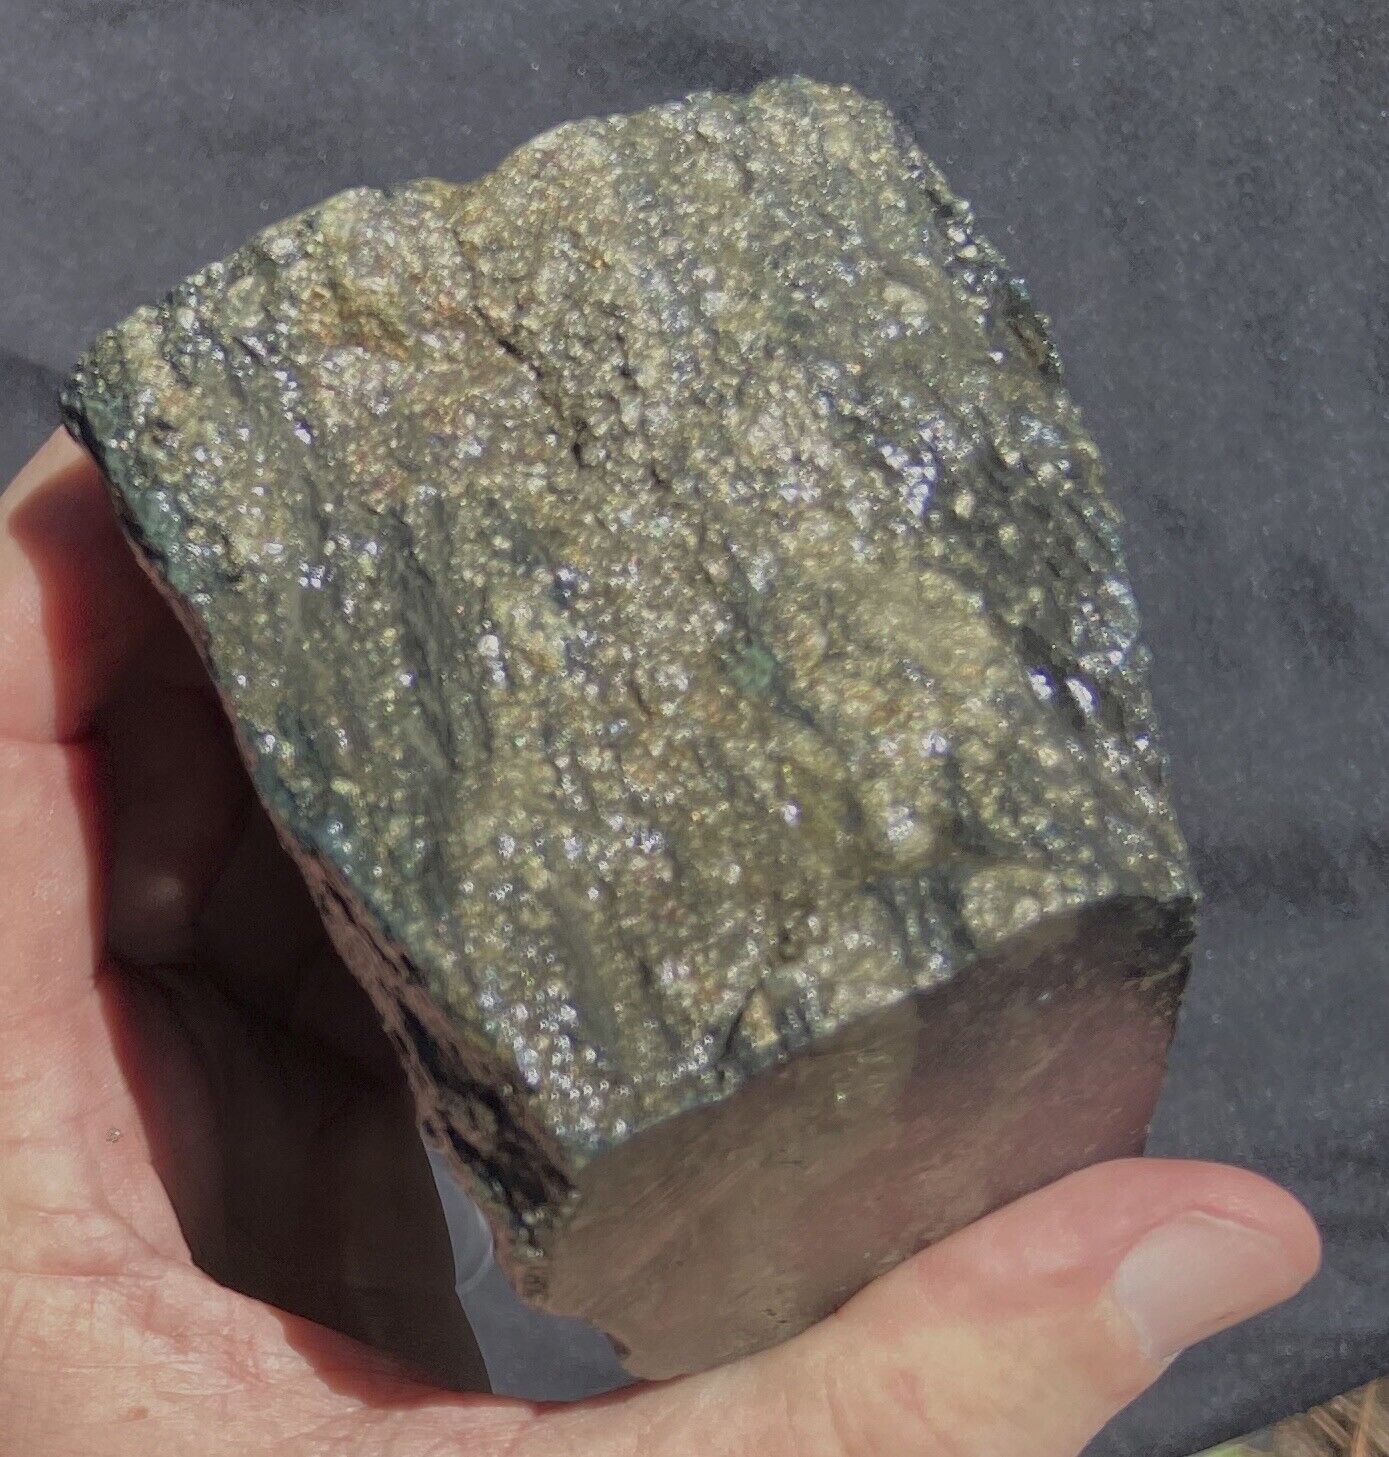 ChalcoPyrite Ore Large Opened Rough Collectable Stone 2.41 Pounds or 1094 Grams 